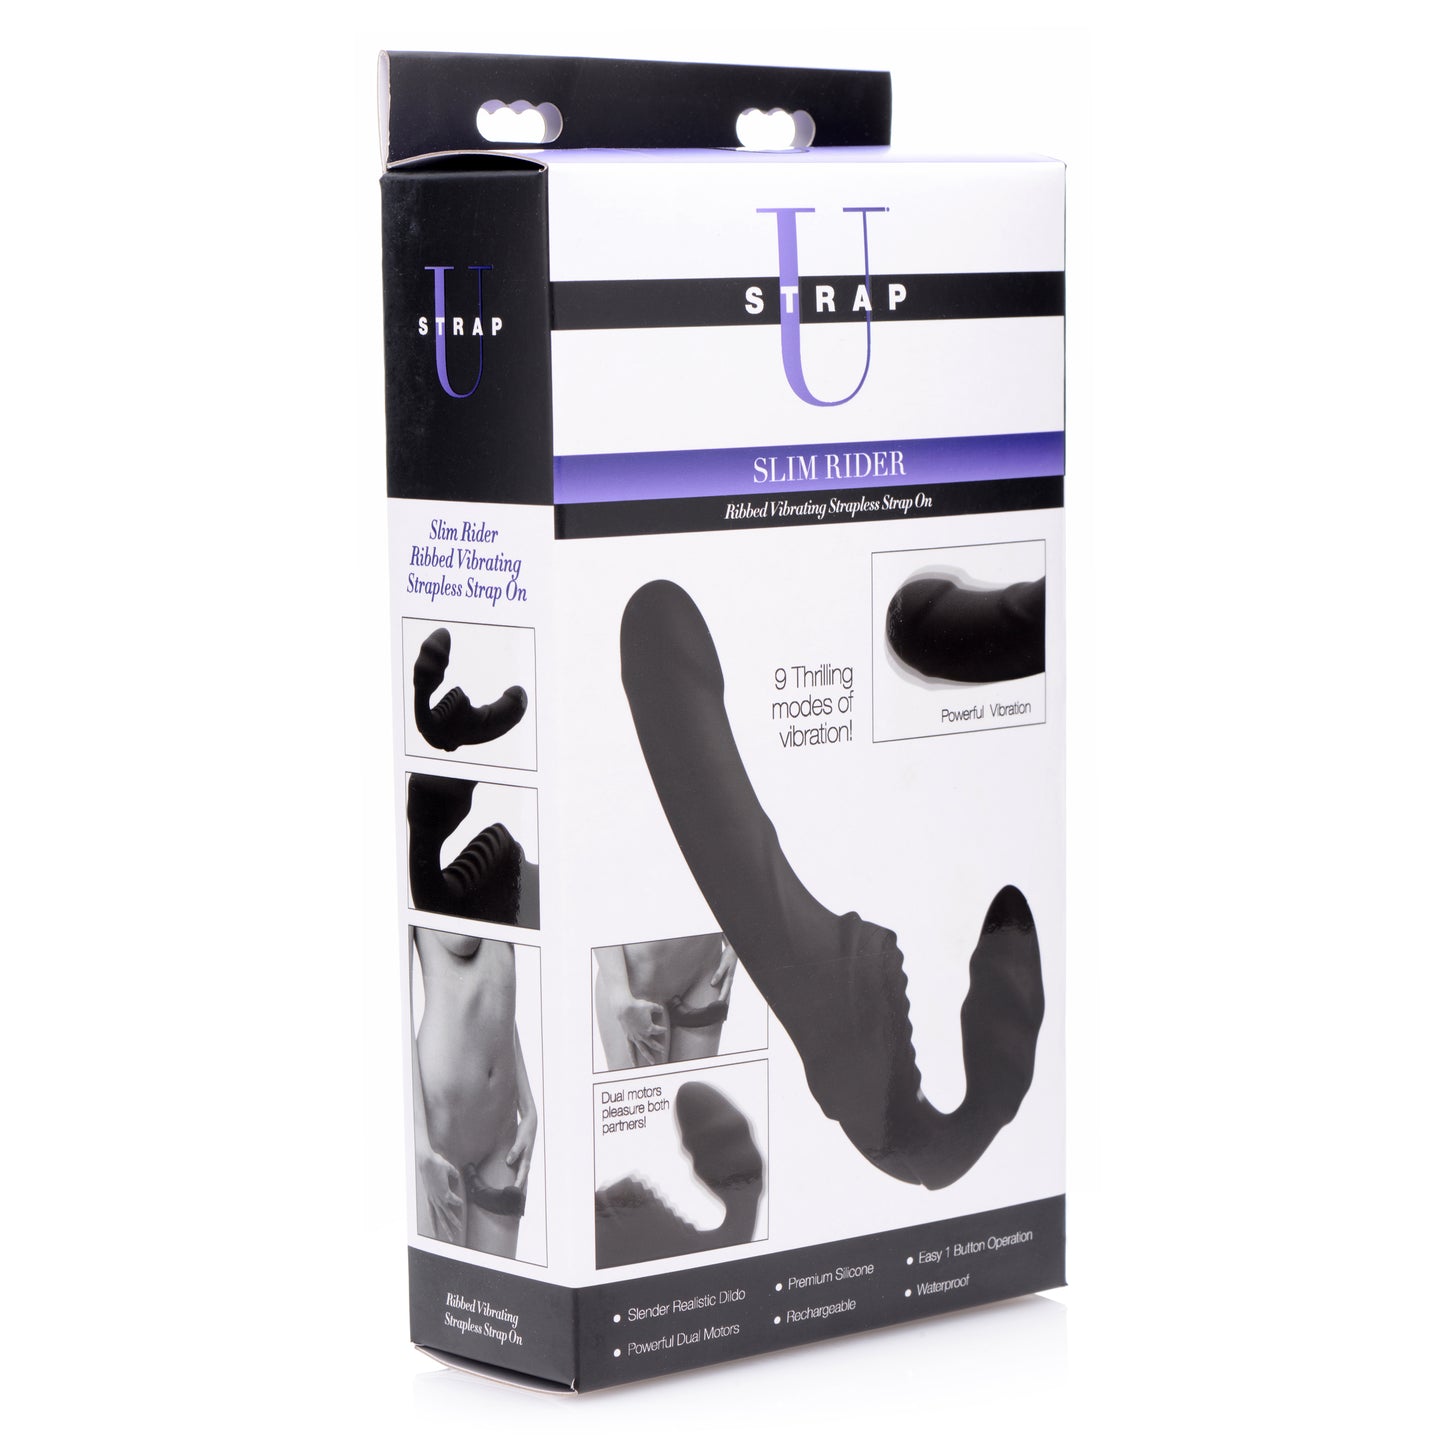 Slim Rider Ribbed Vibrating Silicone Strapless Strap On - Just for you desires